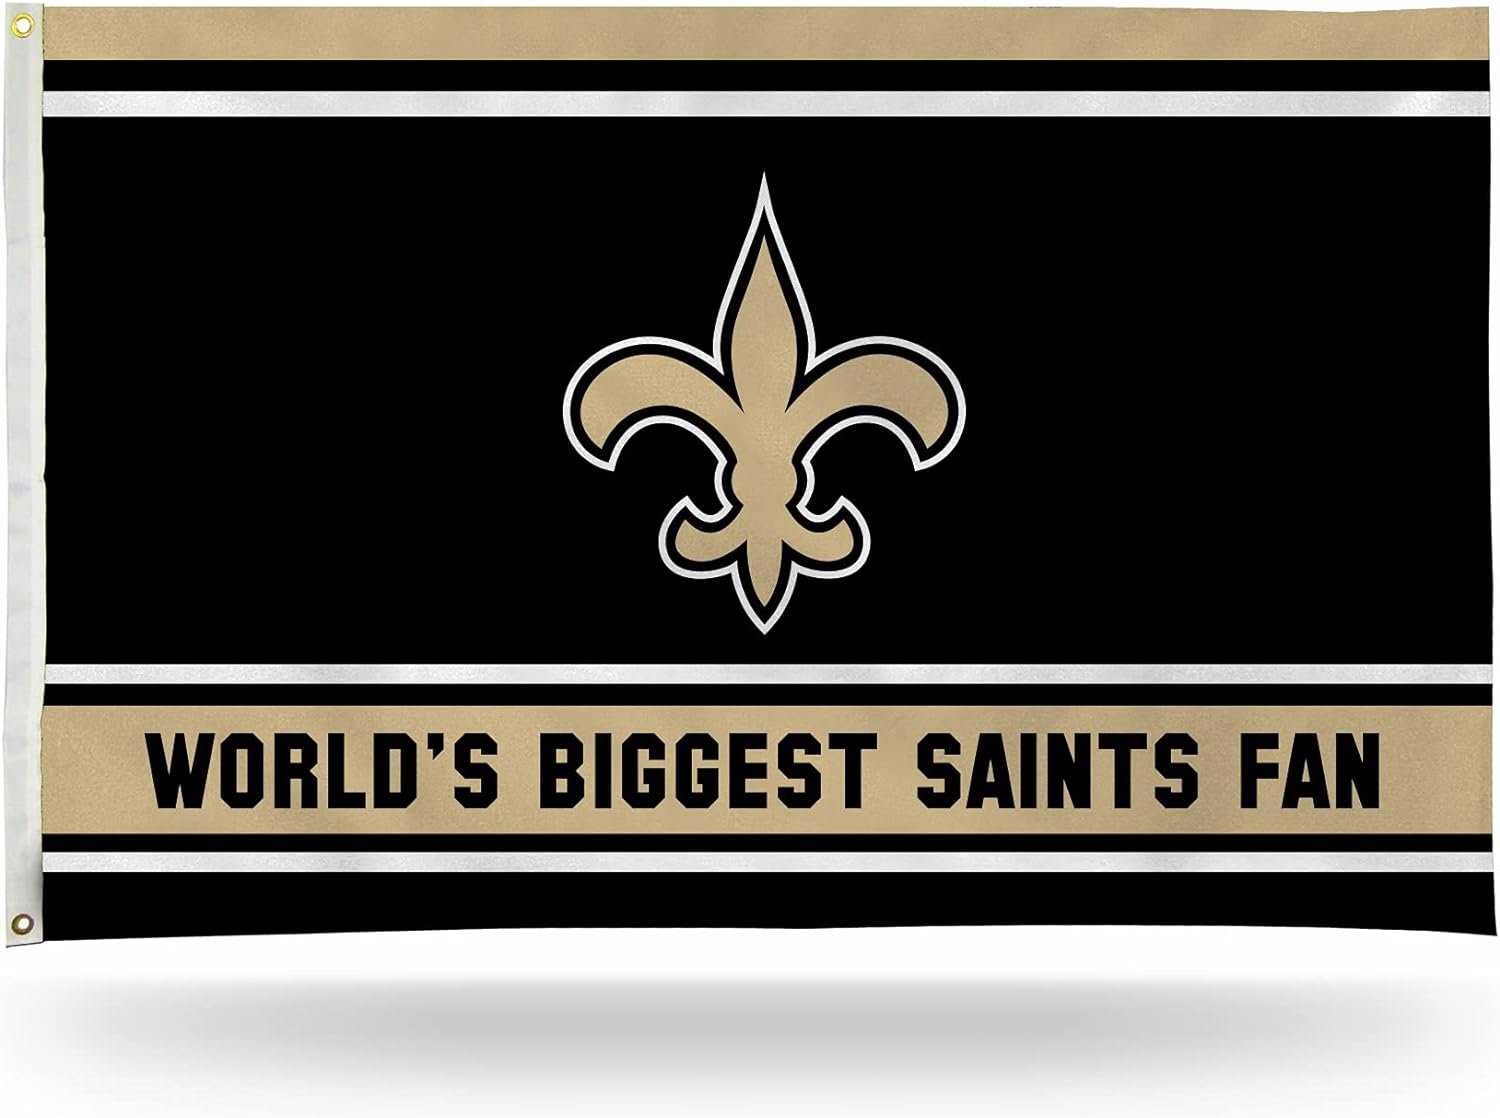 New Orleans Saints 3x5 Feet Flag Banner, World's Biggest Fan, Metal Grommets, Single Sided, Indoor or Outdoor Use